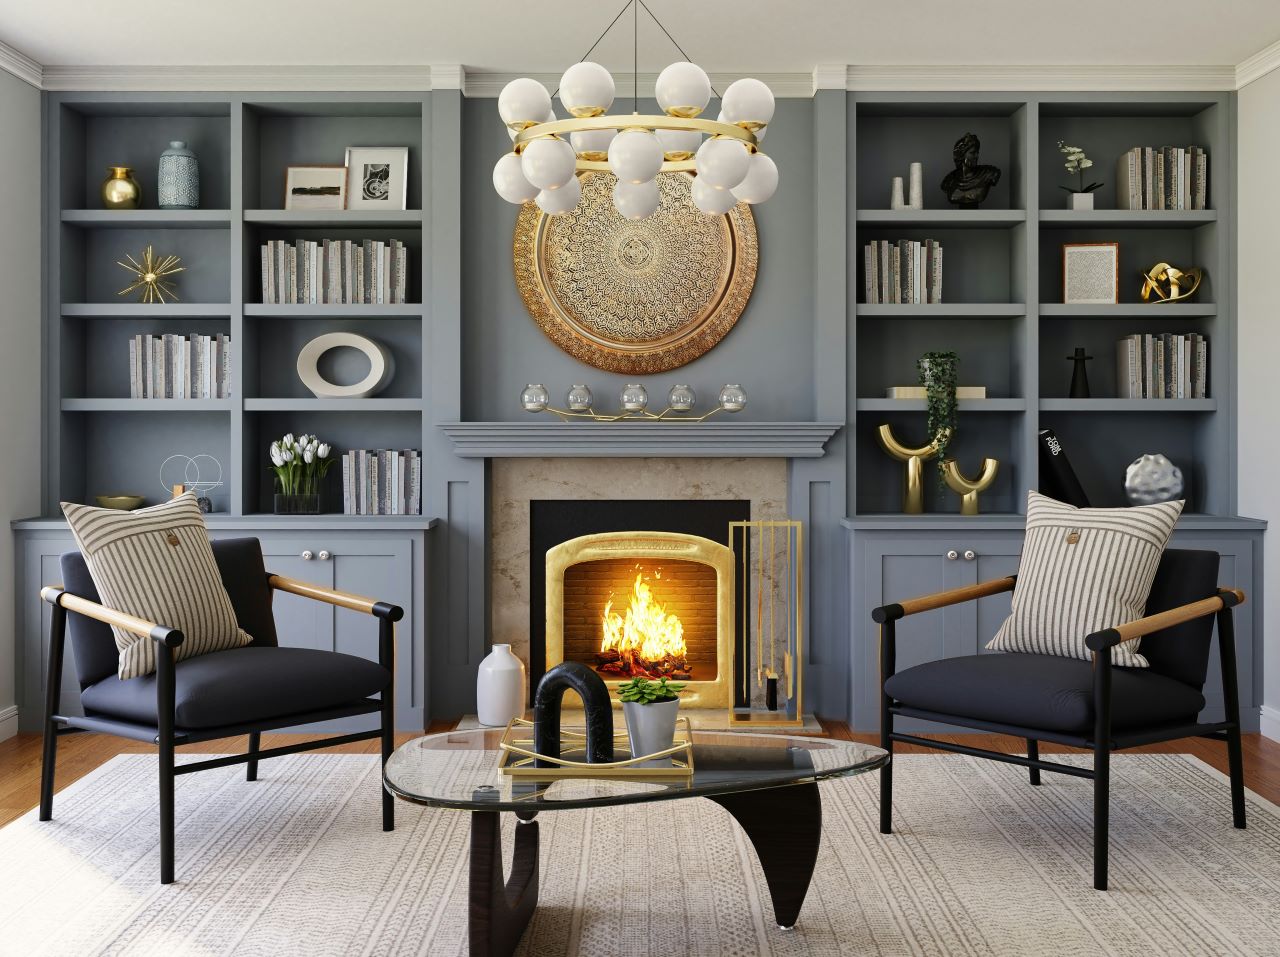 Create a cohesive ambiance by harmonizing the colors and textures surrounding your fireplace.